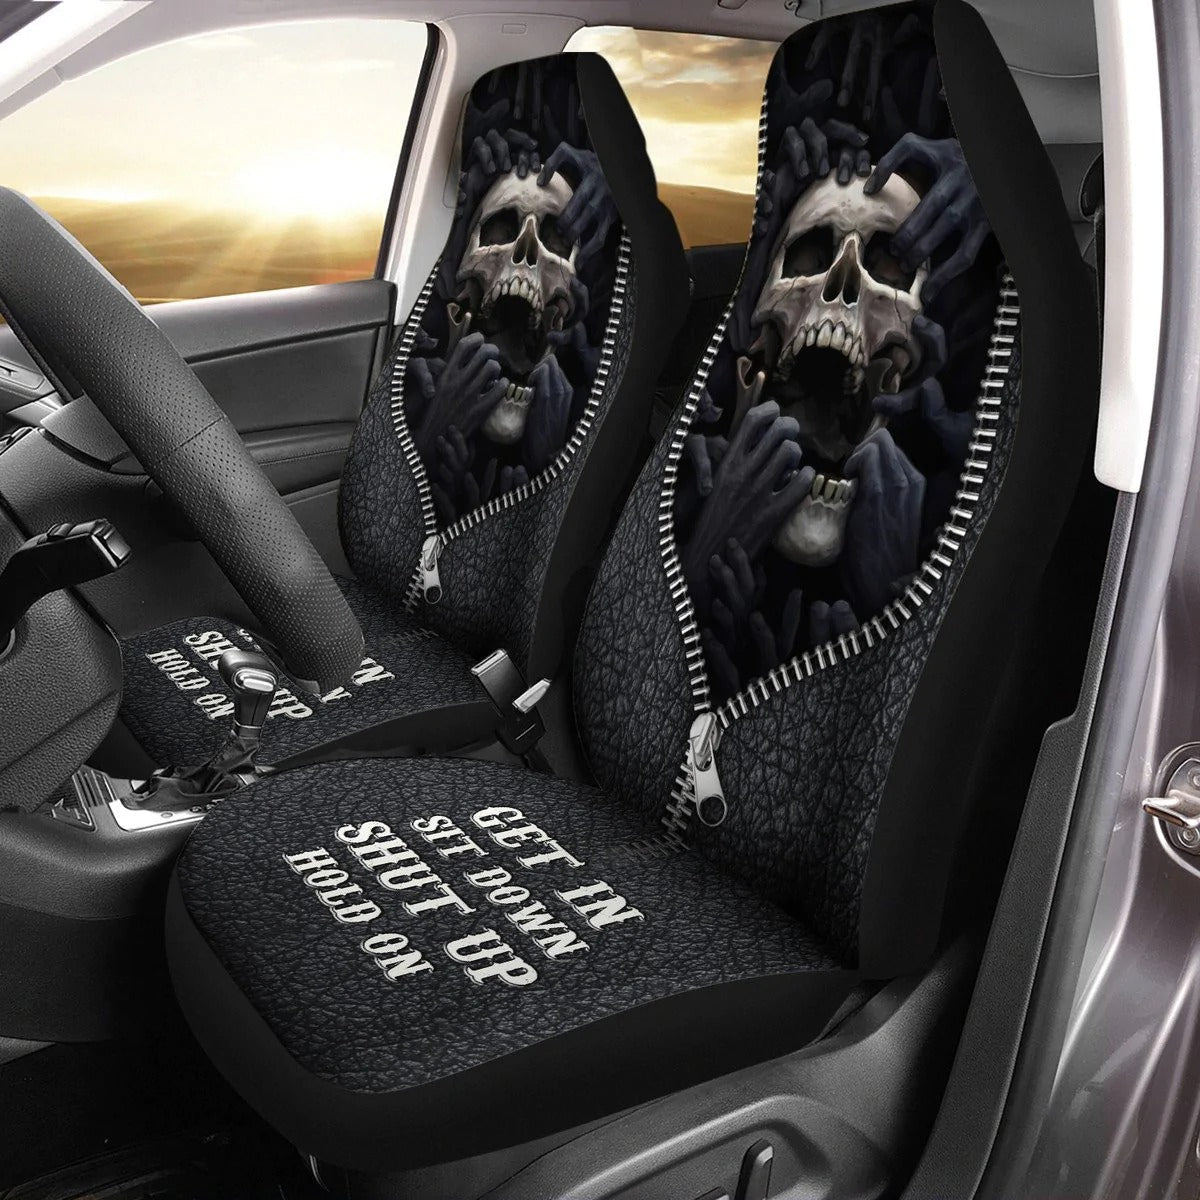 Skull Darkness Hold on Car Seat Covers/ 3D Print Skull On Front Auto Seat Covers